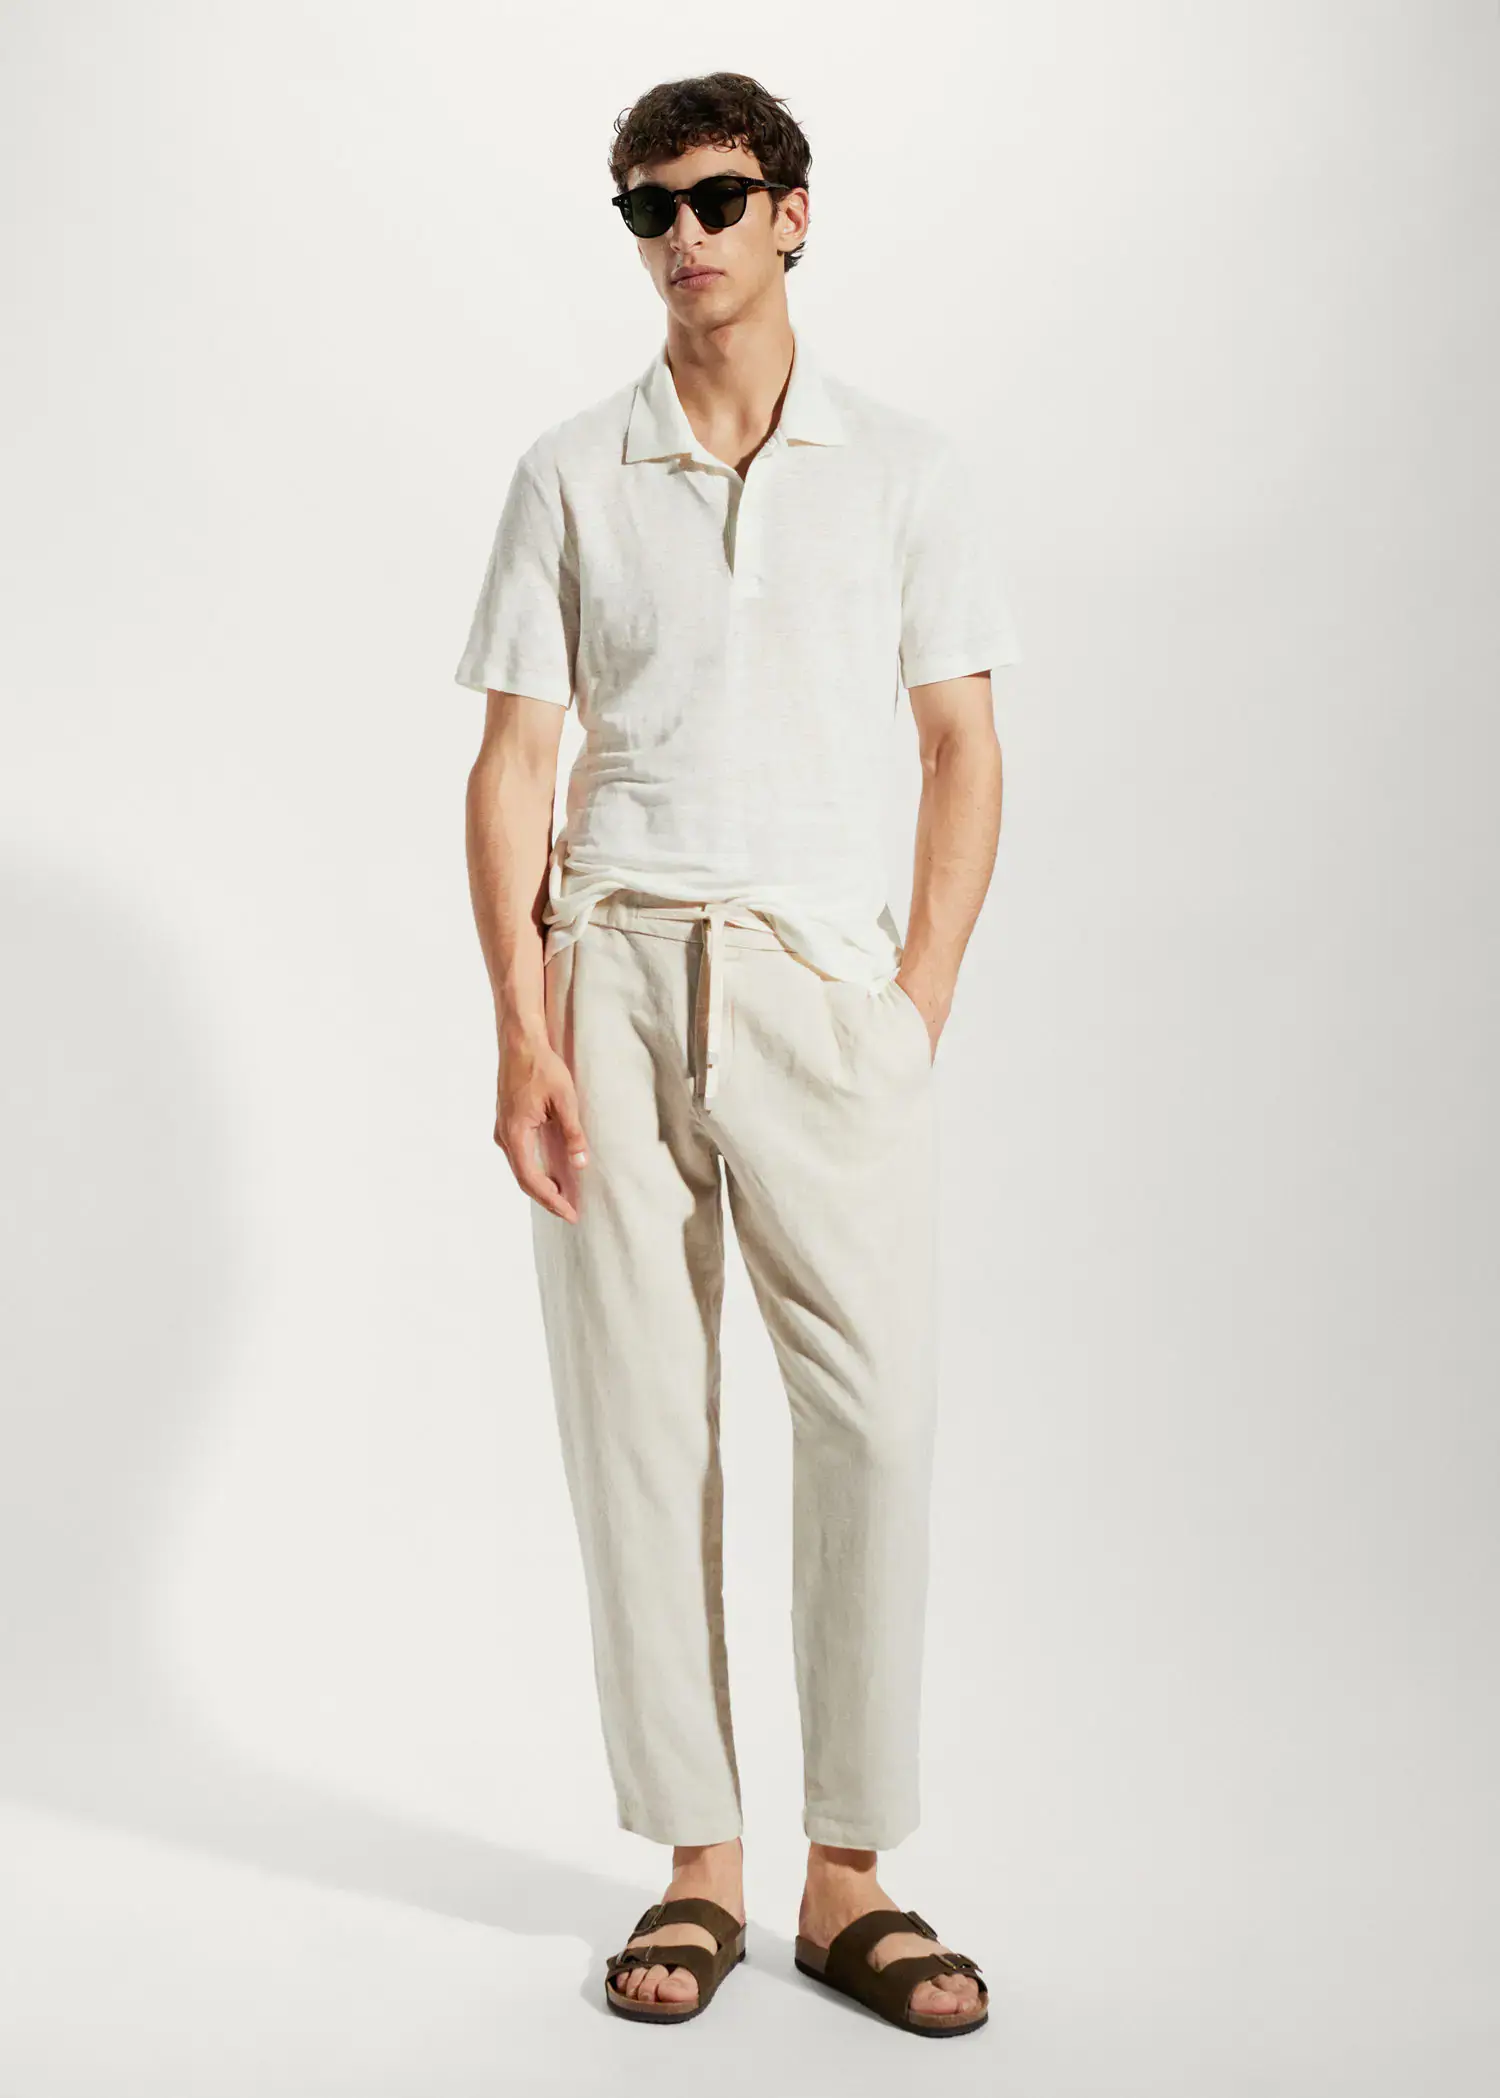 Mango Slim fit 100% linen polo shirt. a man in a white shirt and beige pants. 